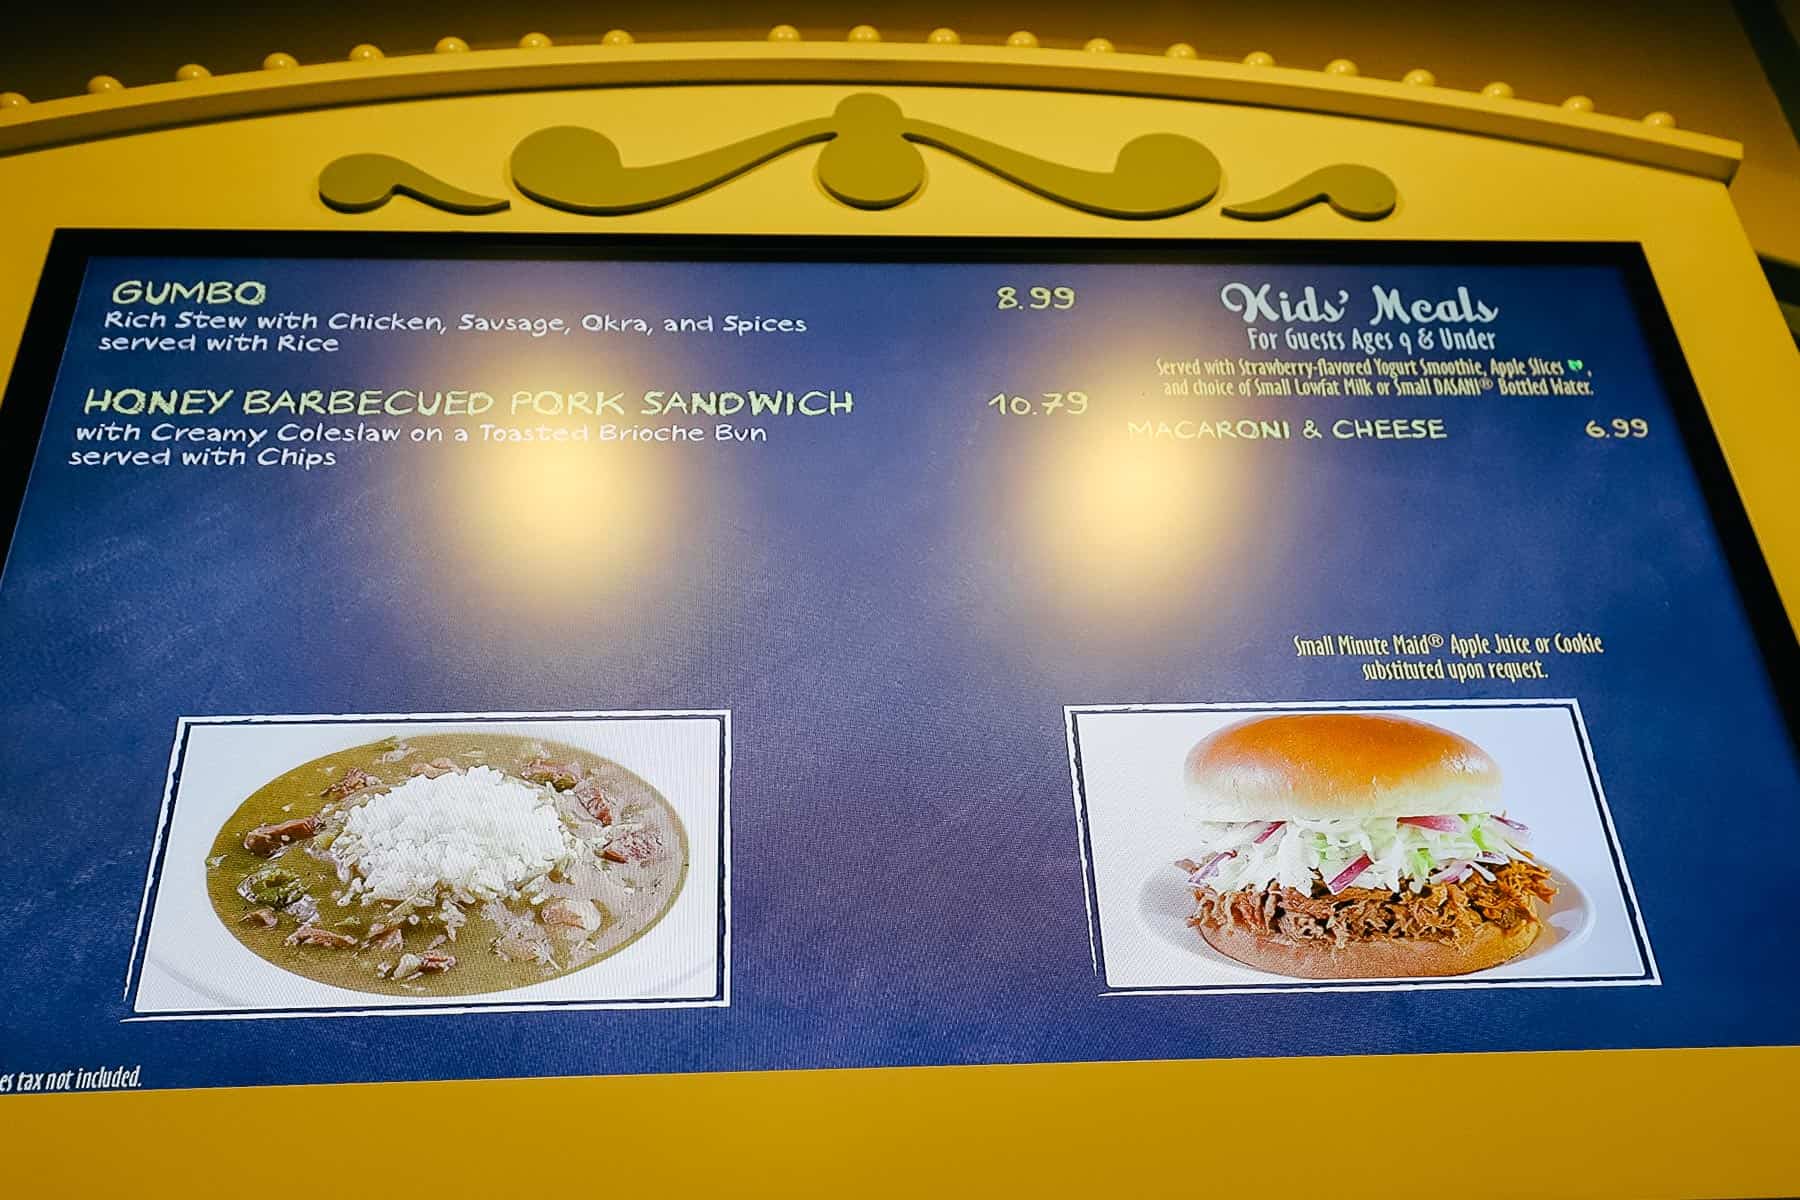 a menu board with gumbo and Honey barbecued sandwich